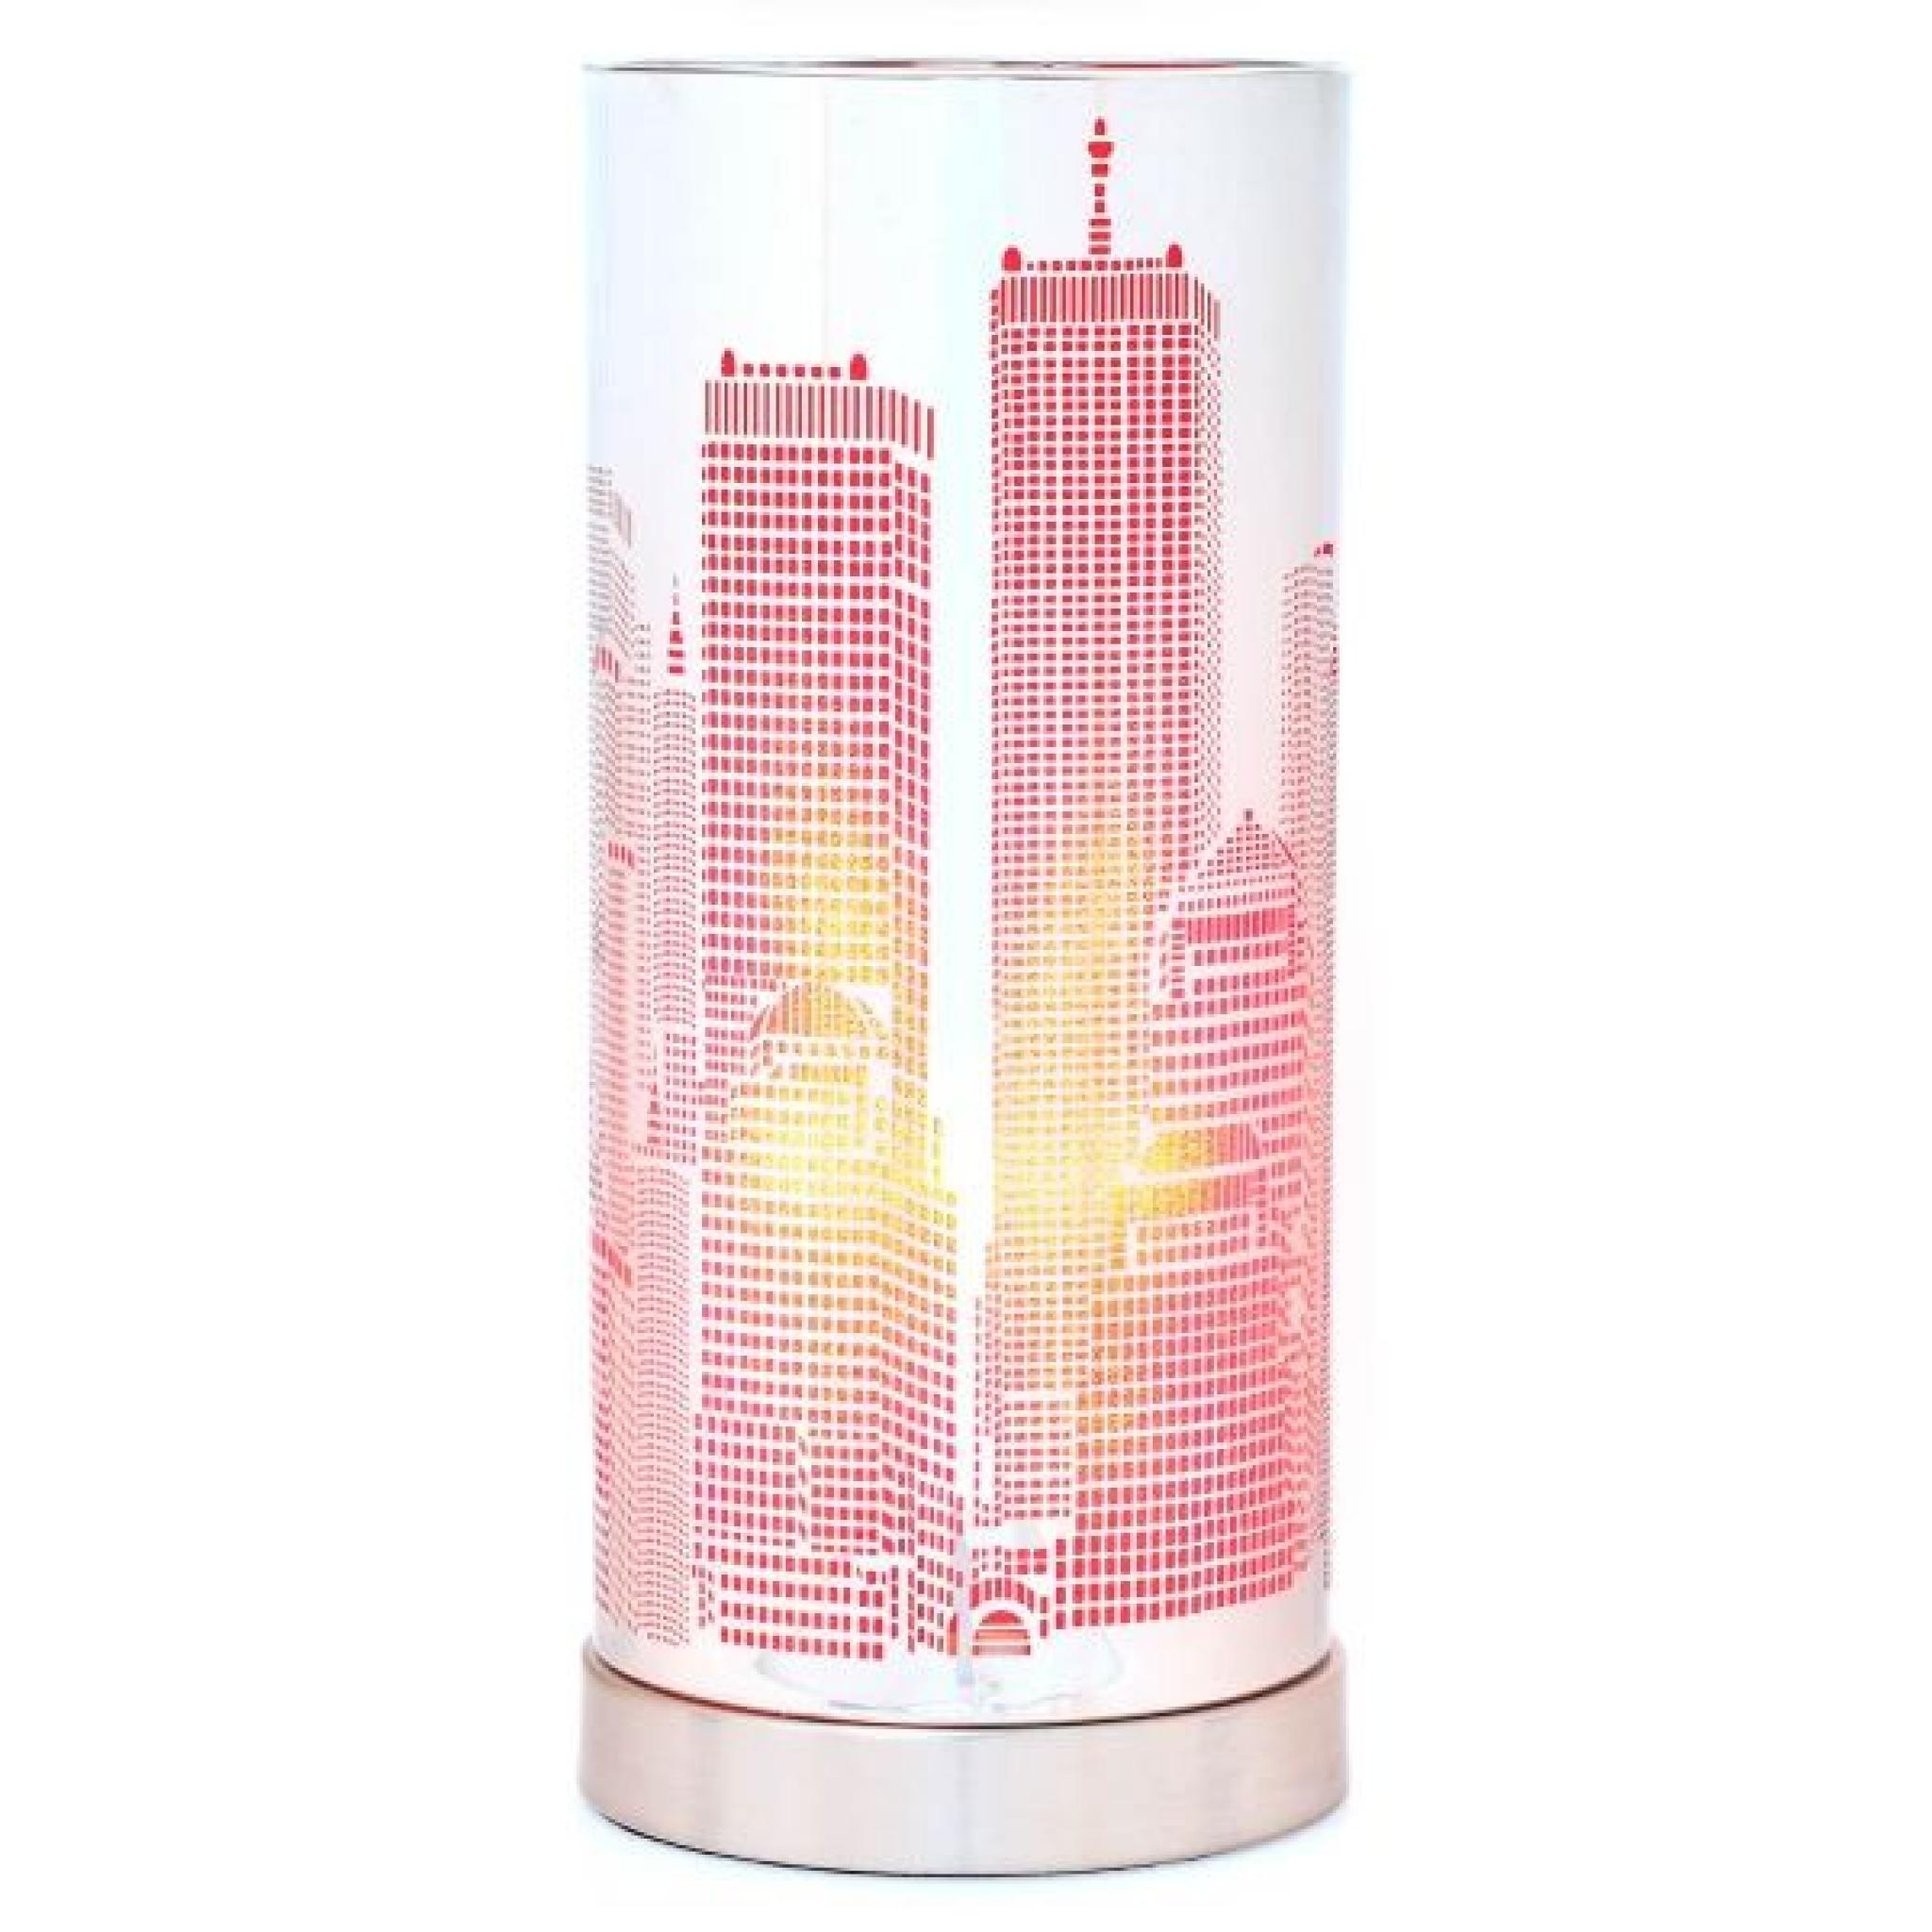 LAMPE TOUCH CITY CYLINDRE coloris : Rose